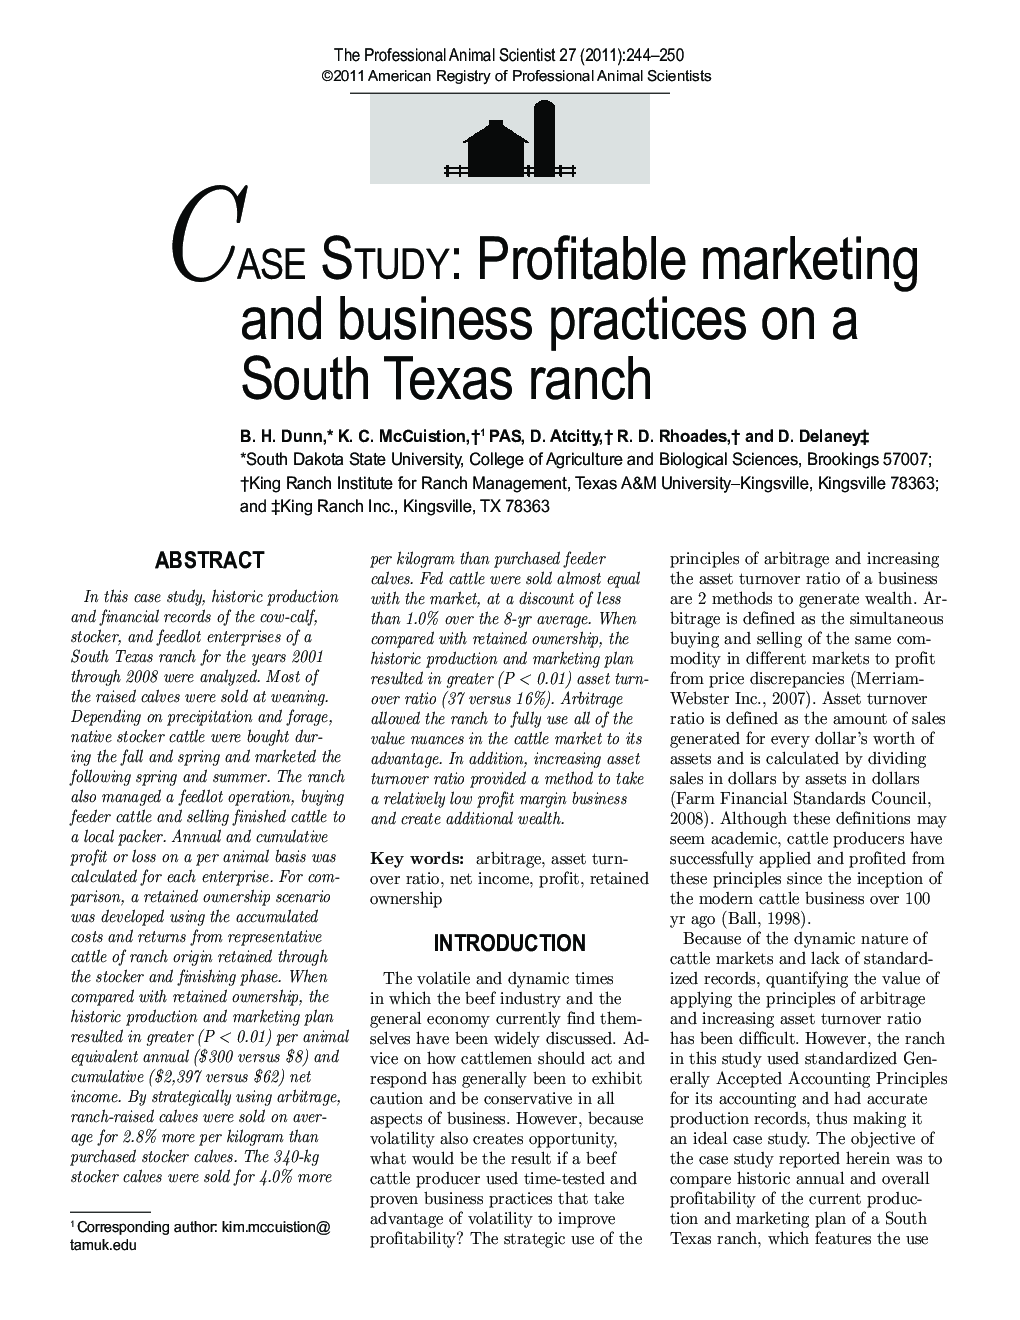 CASE STUDY: Profitable marketing and business practices on a South Texas ranch